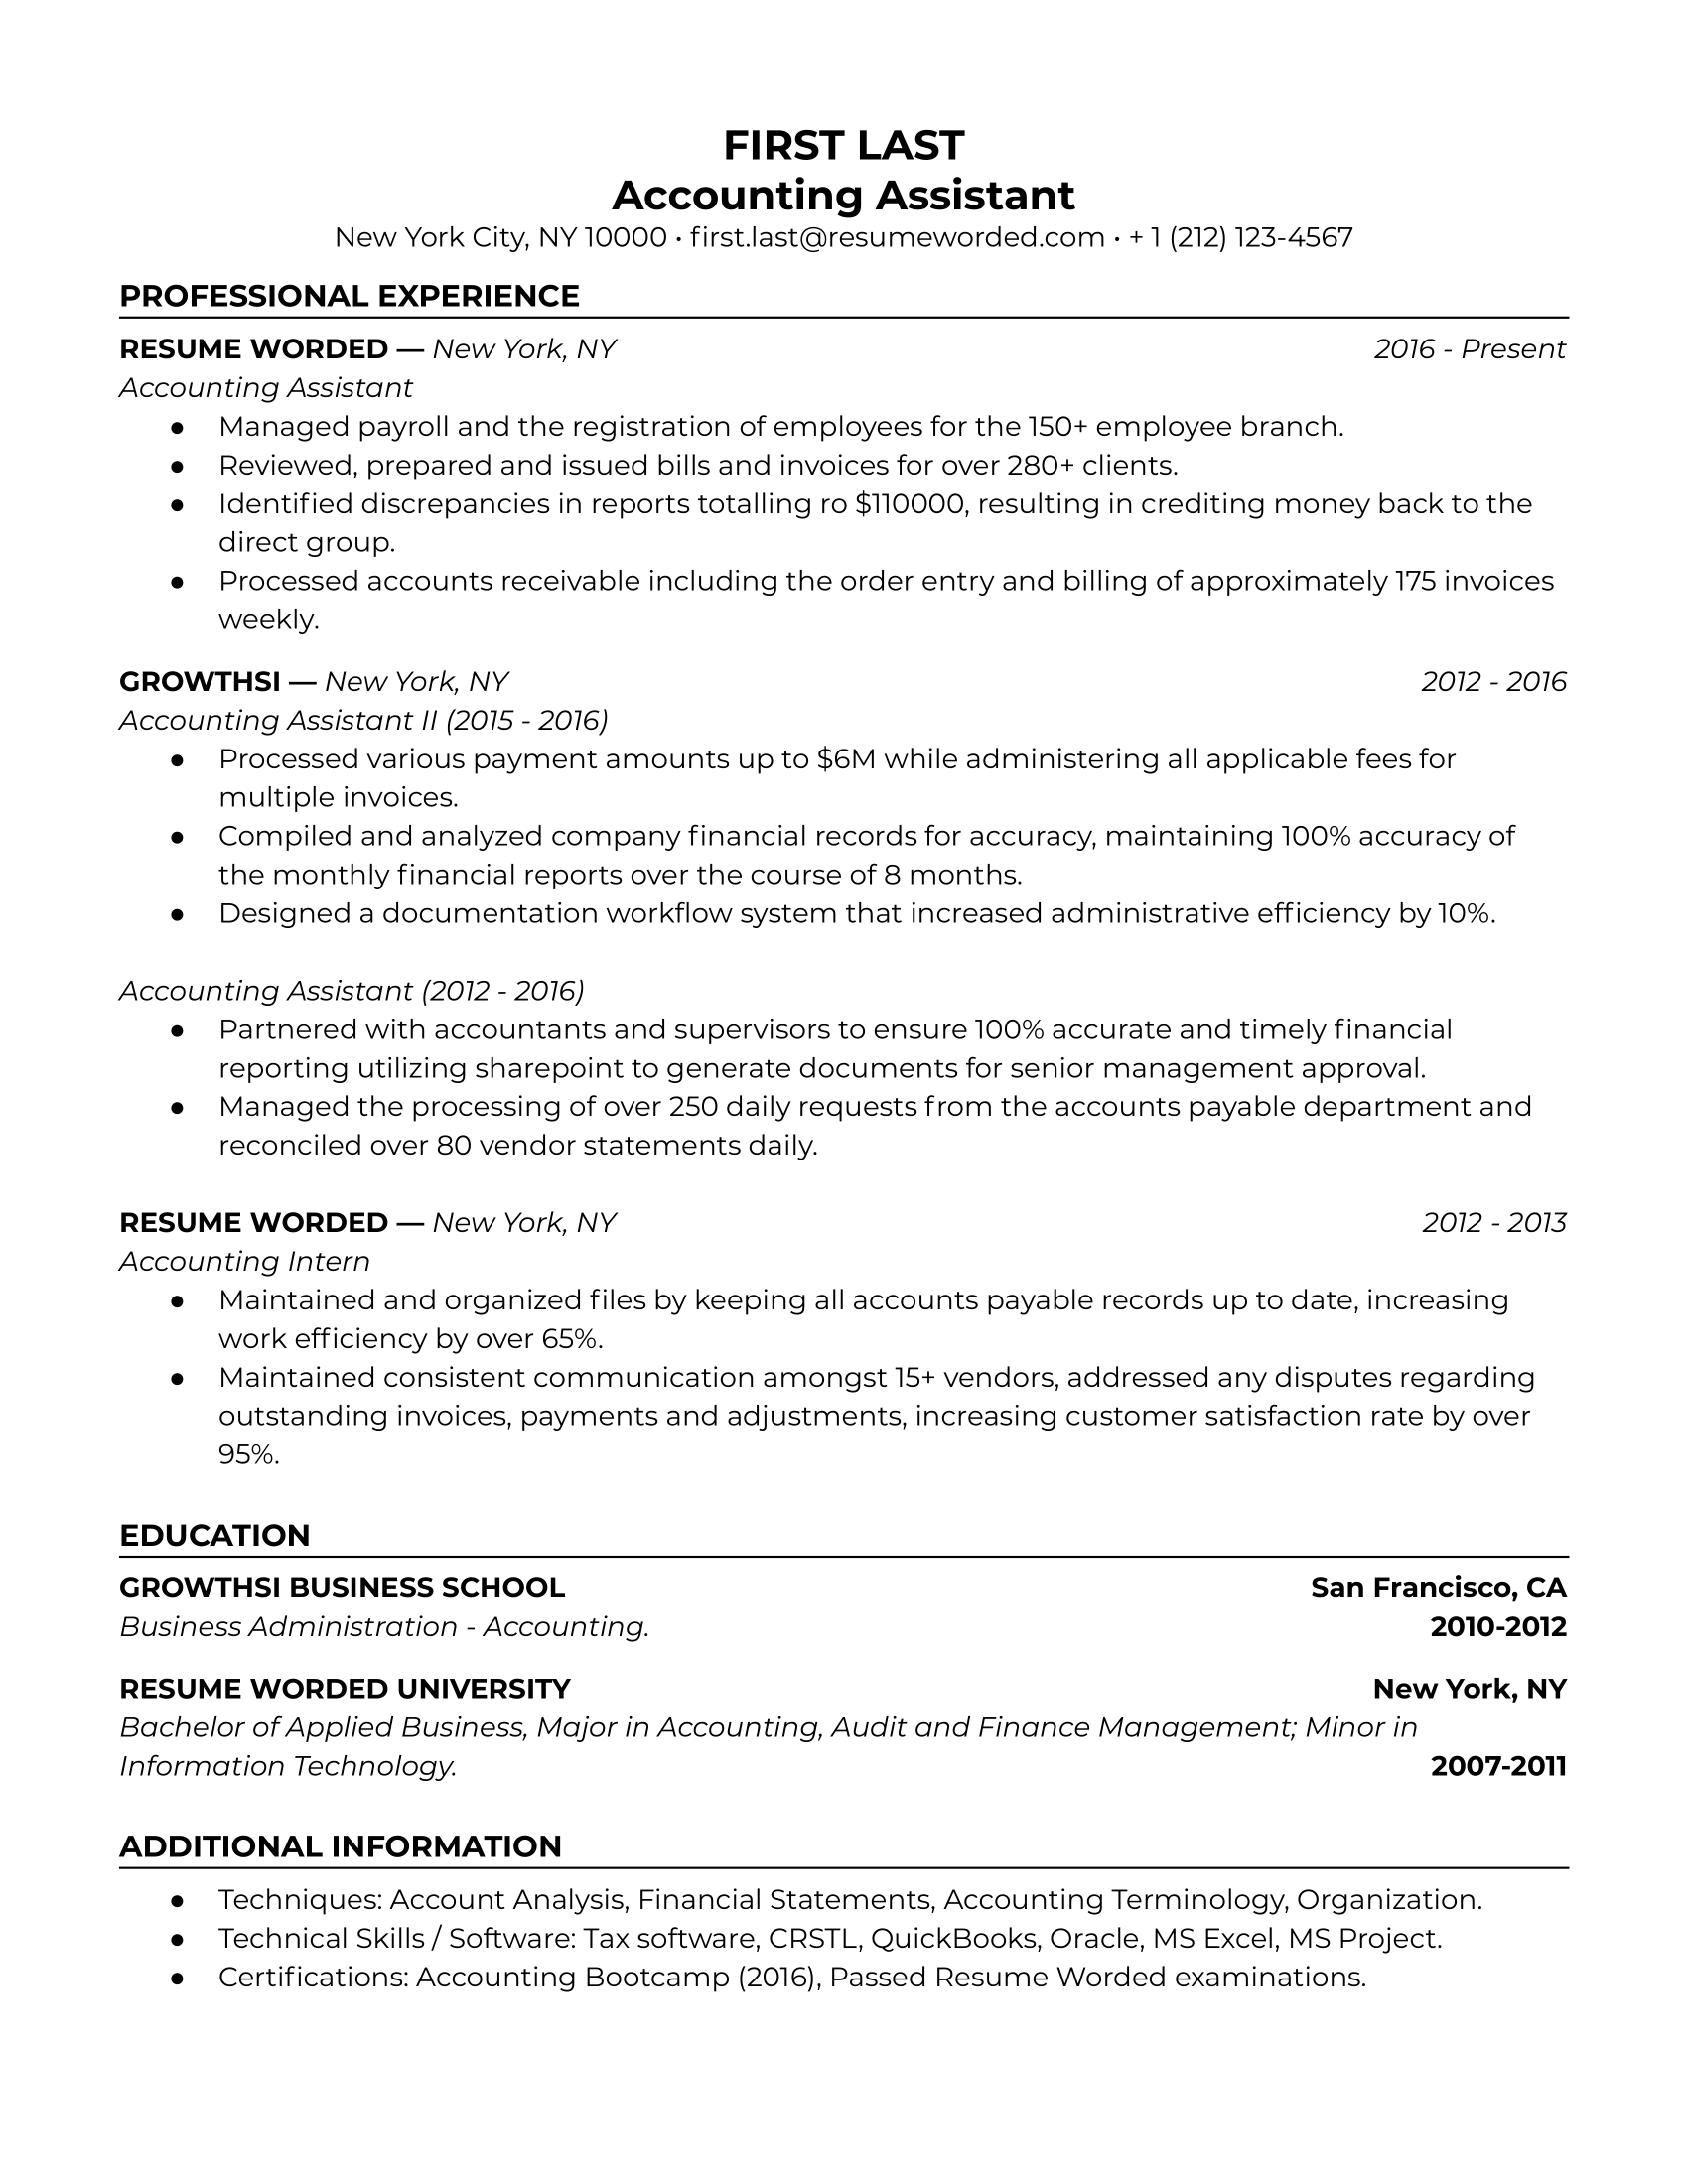 A professional CV for an Accounting Assistant highlighting software proficiency and numerical achievements.